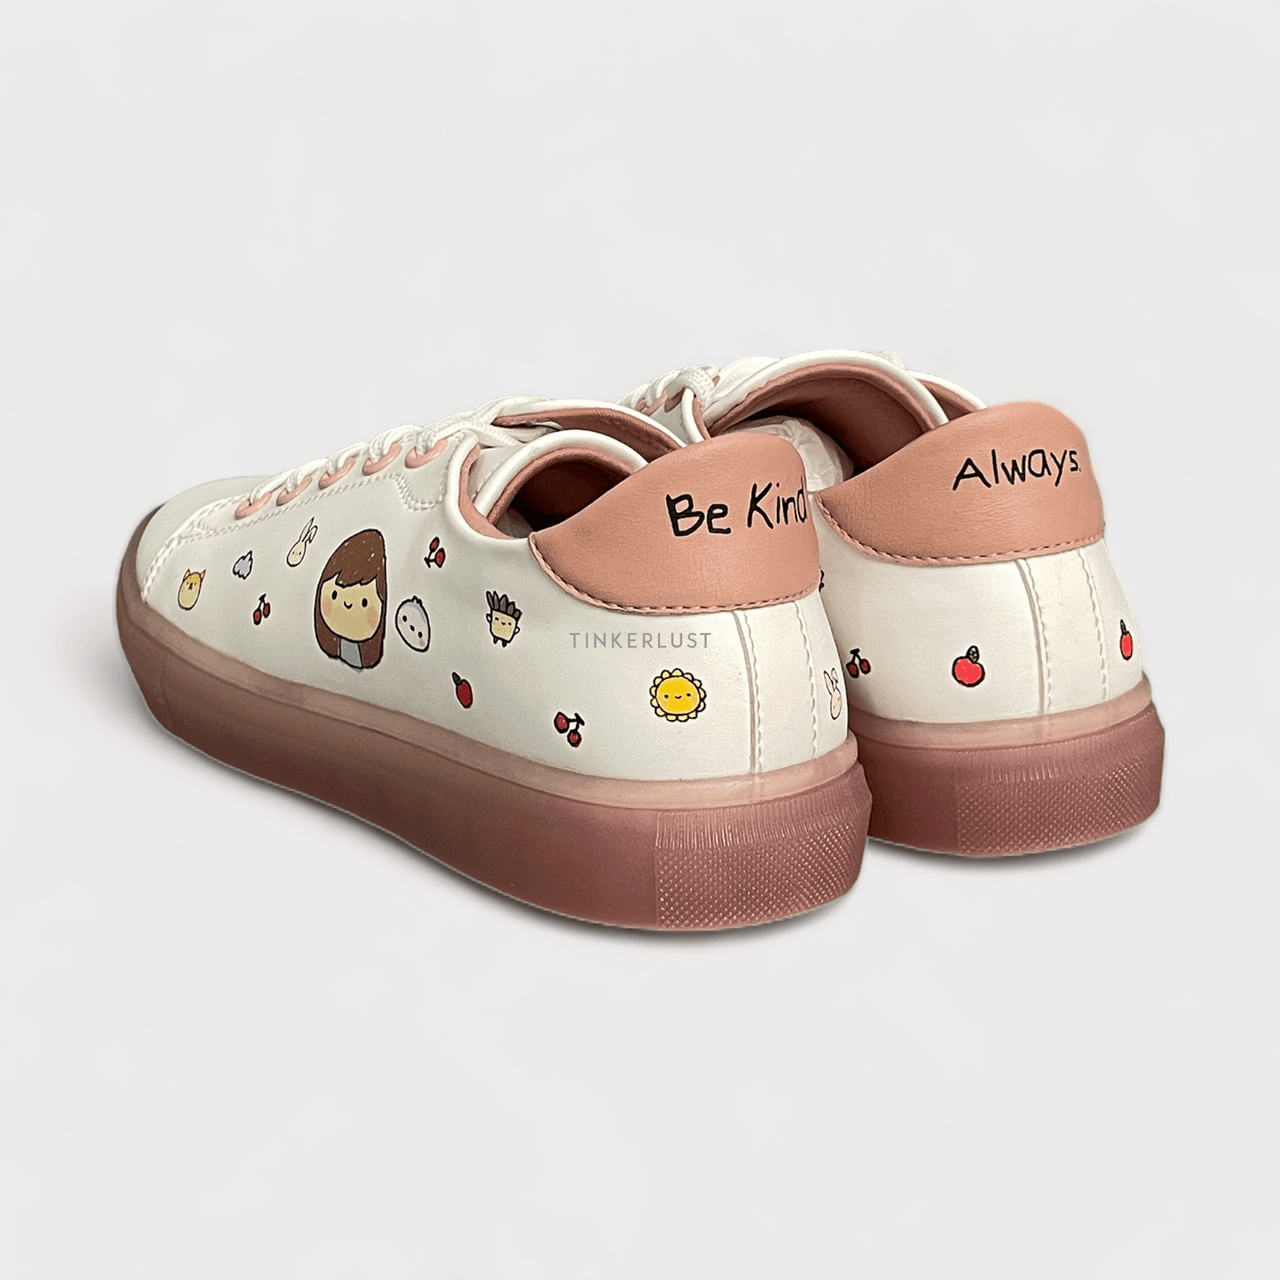 byeol x Sally Piper Be Kind White & Soft Pink Sneakers